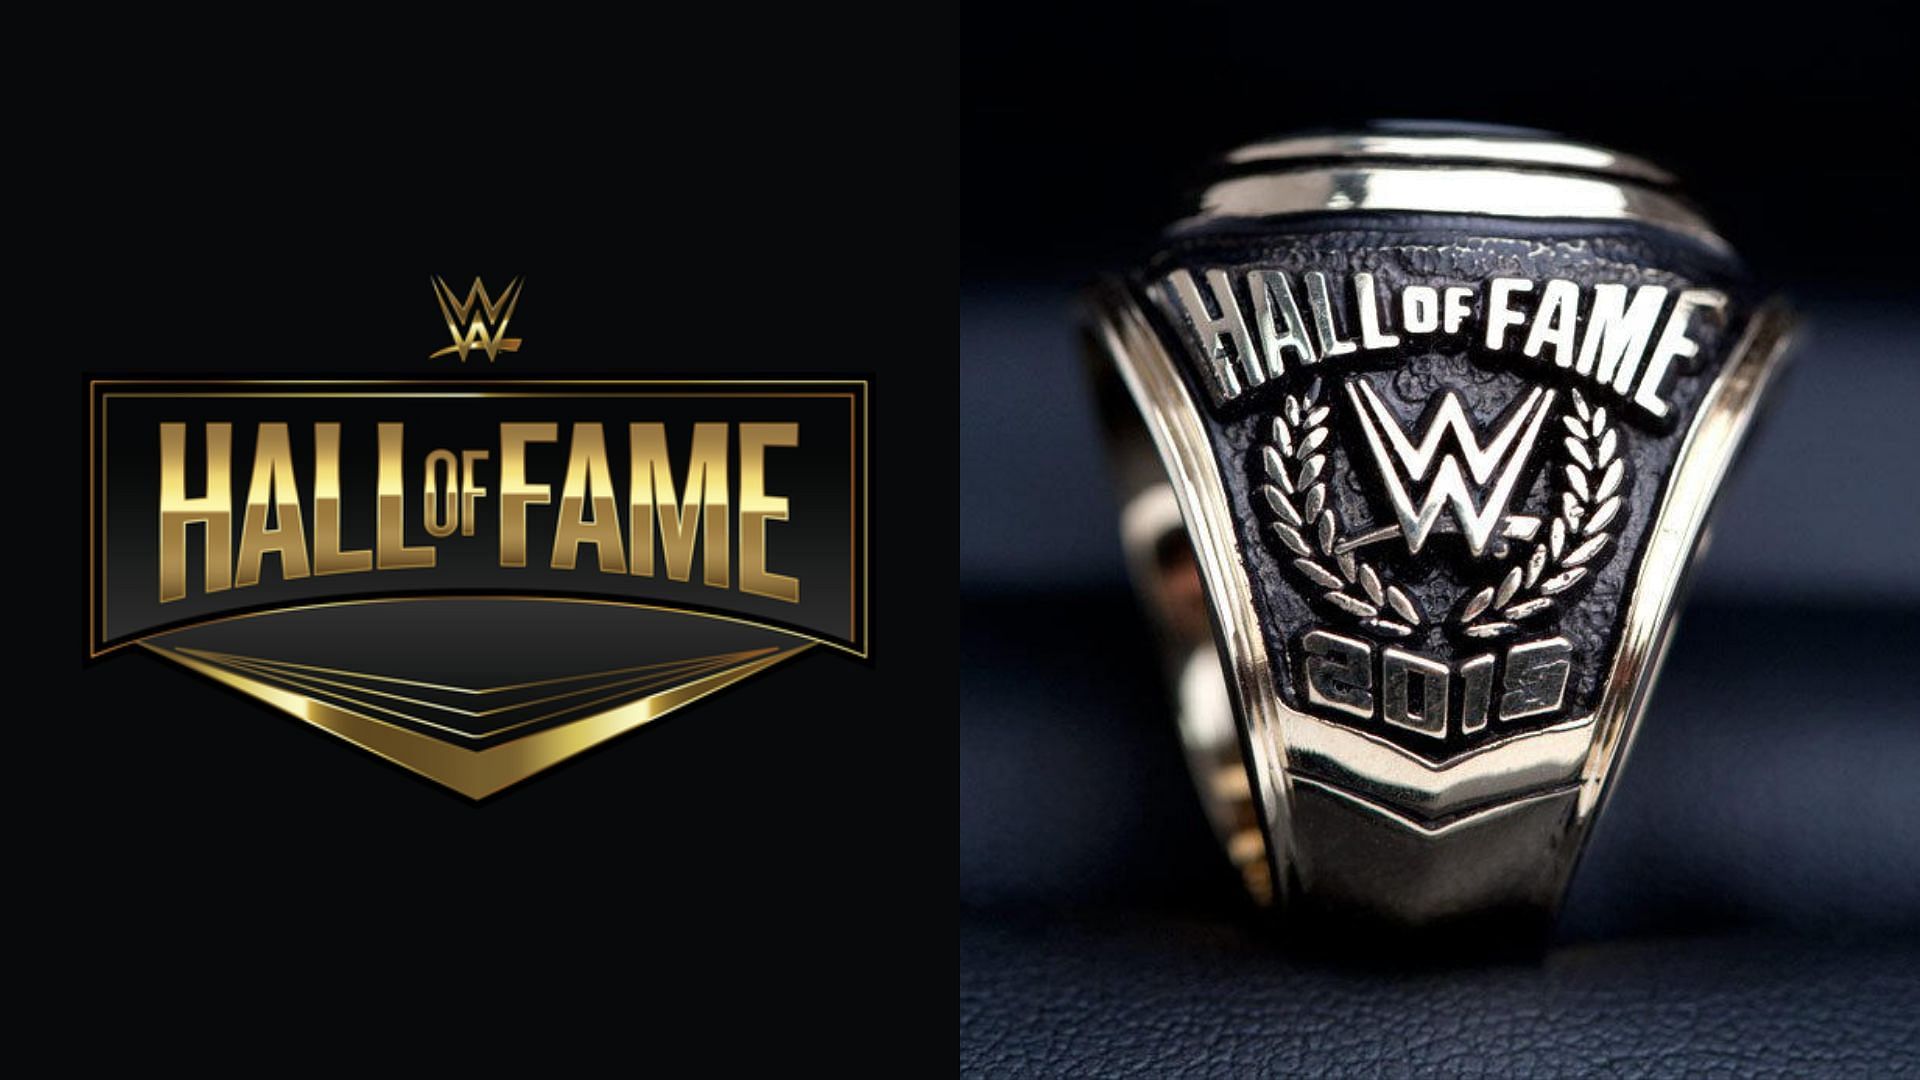 The WWE Hall of Fame takes place every year on WrestleMania weekend.